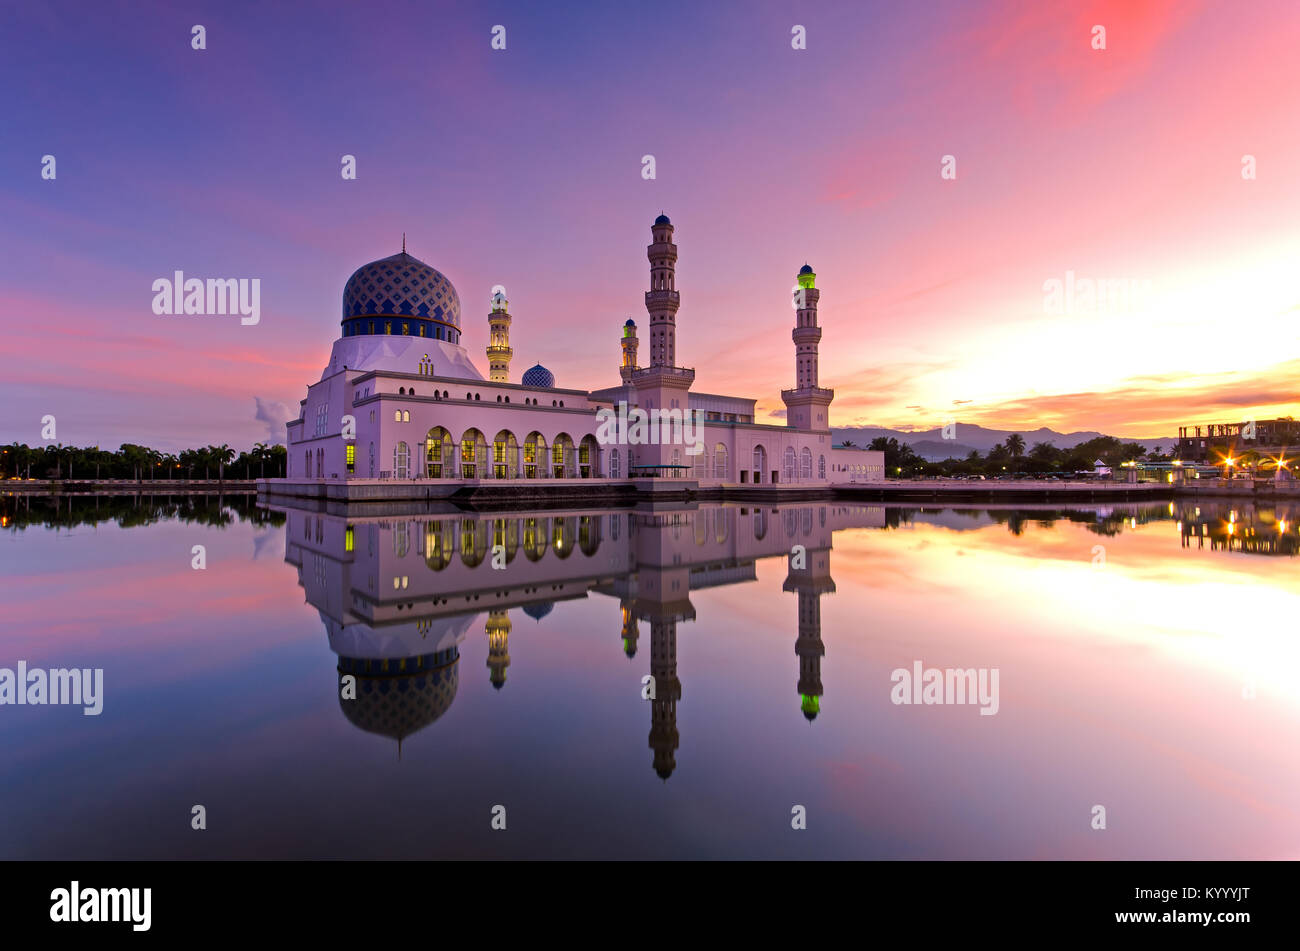 Beautiful sunrise over Kota Kinabalu city floating mosque. The mosque is one of the most popular landmark destination in Sabah Borneo, Malaysia. Stock Photo